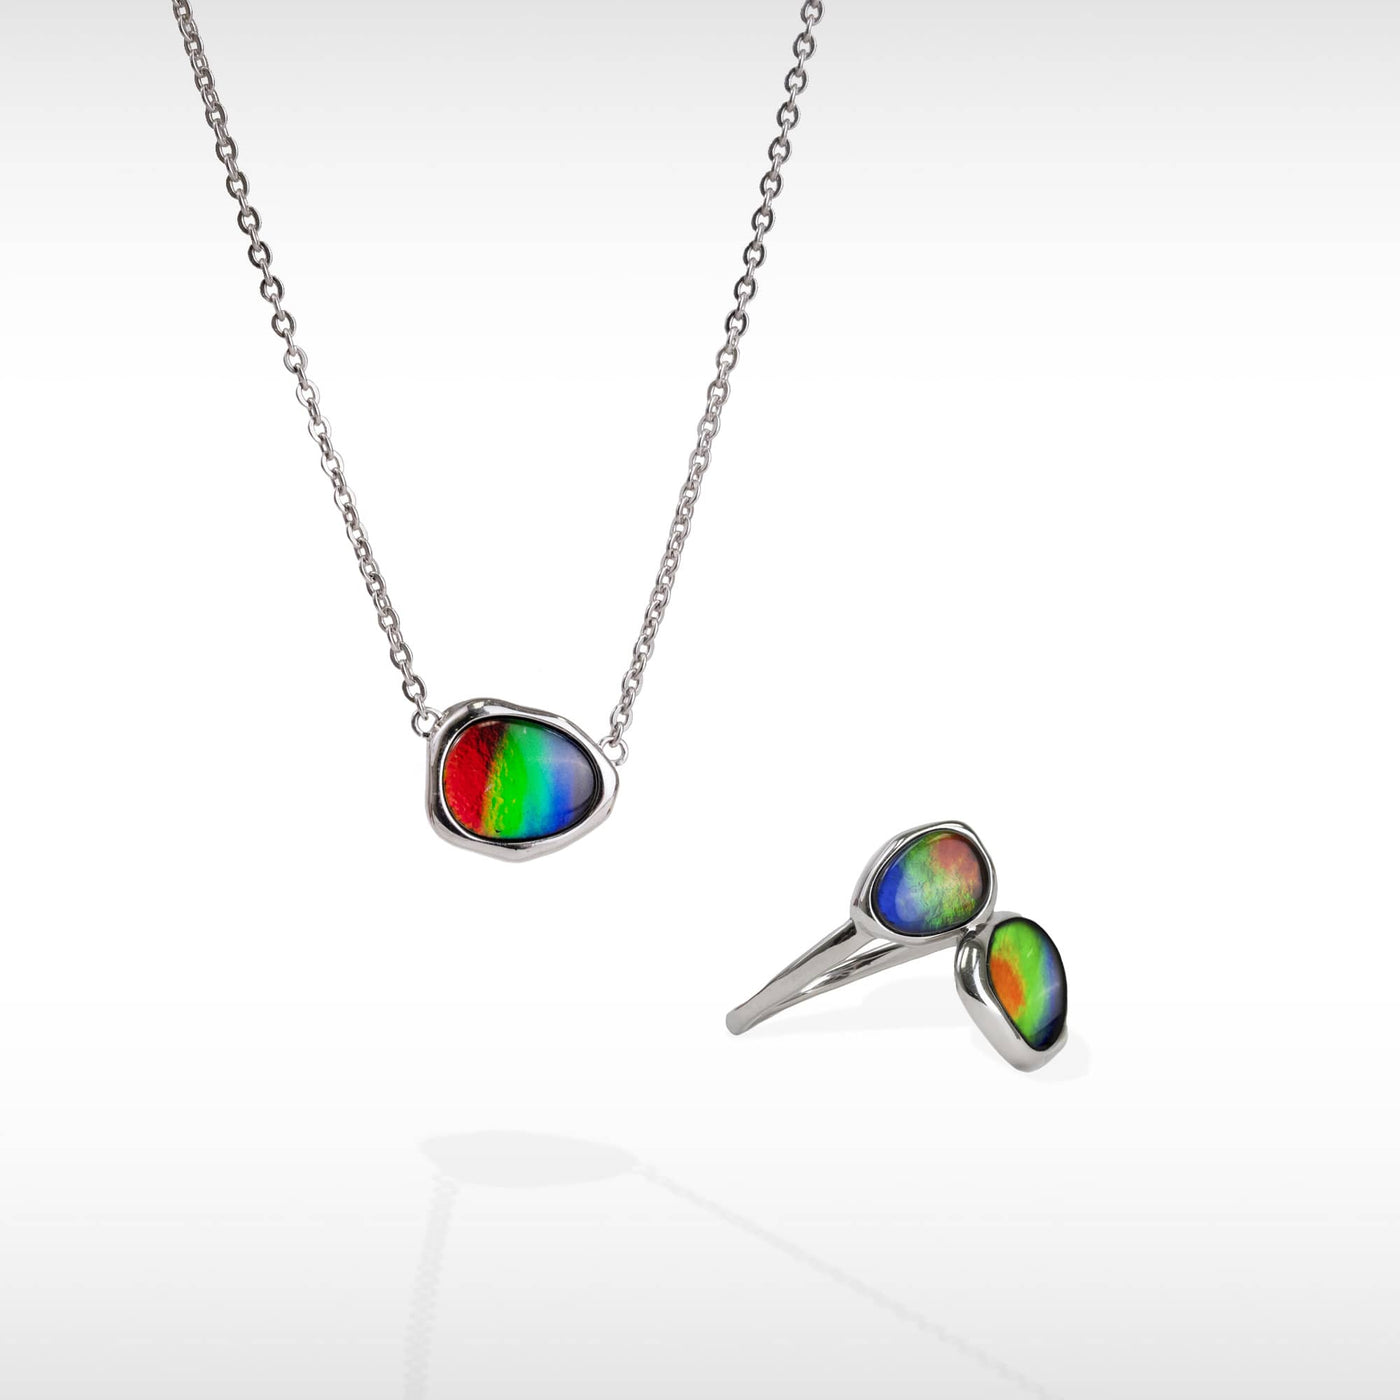 Organic ammolite pendant and ring set in sterling silver